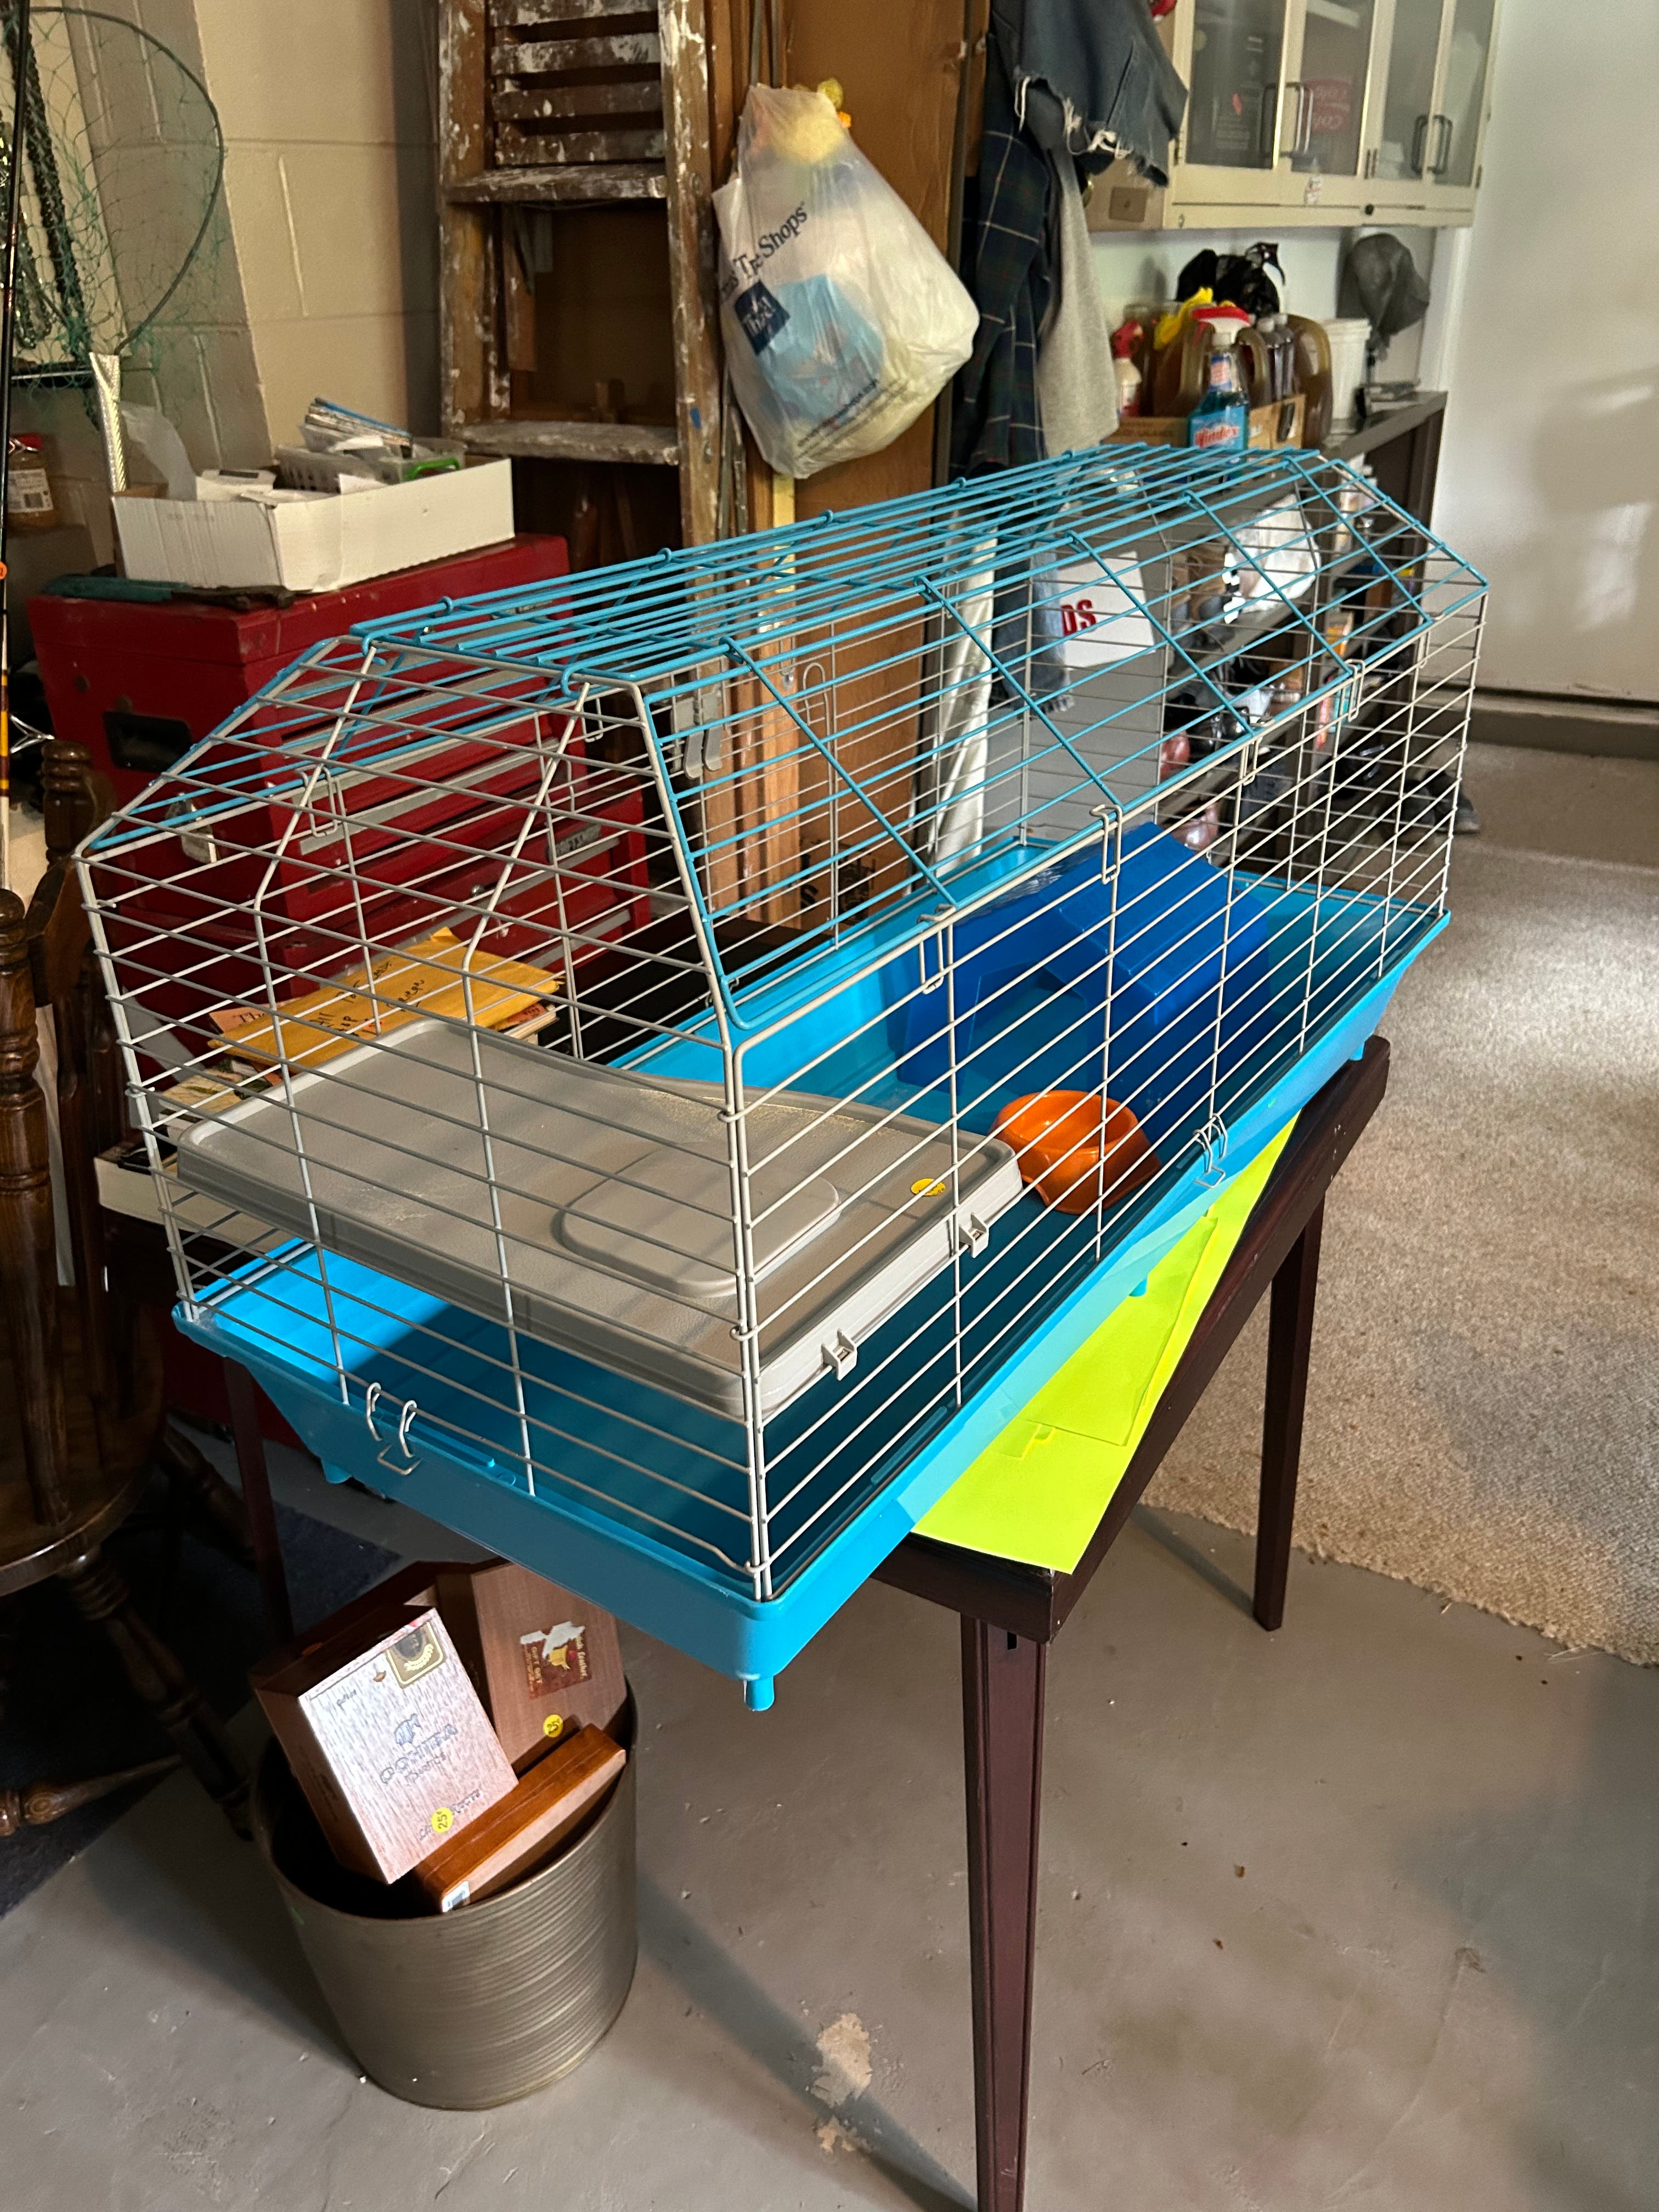 Guinea pig habitat with playpen and bedding